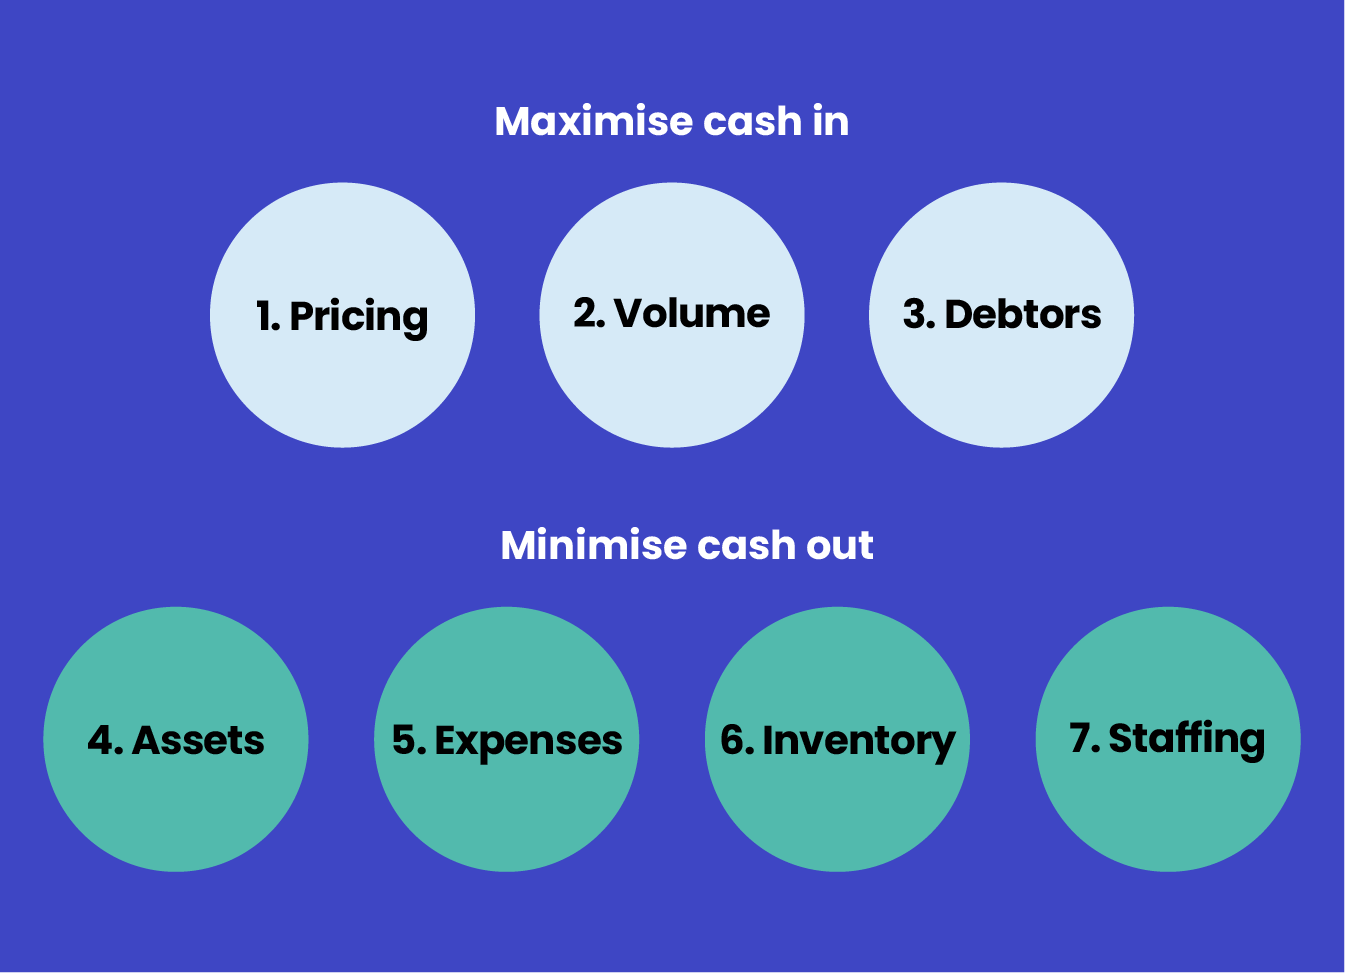 The 7 considerations numbered 1 to 7. The considerations that maximise cash in are, 1. Pricing, 2. Volume, 3. Debtors. The considerations that minimise cash out are, 4. Assets, 5. Expenses, 6. Inventory, 7. Staffing.